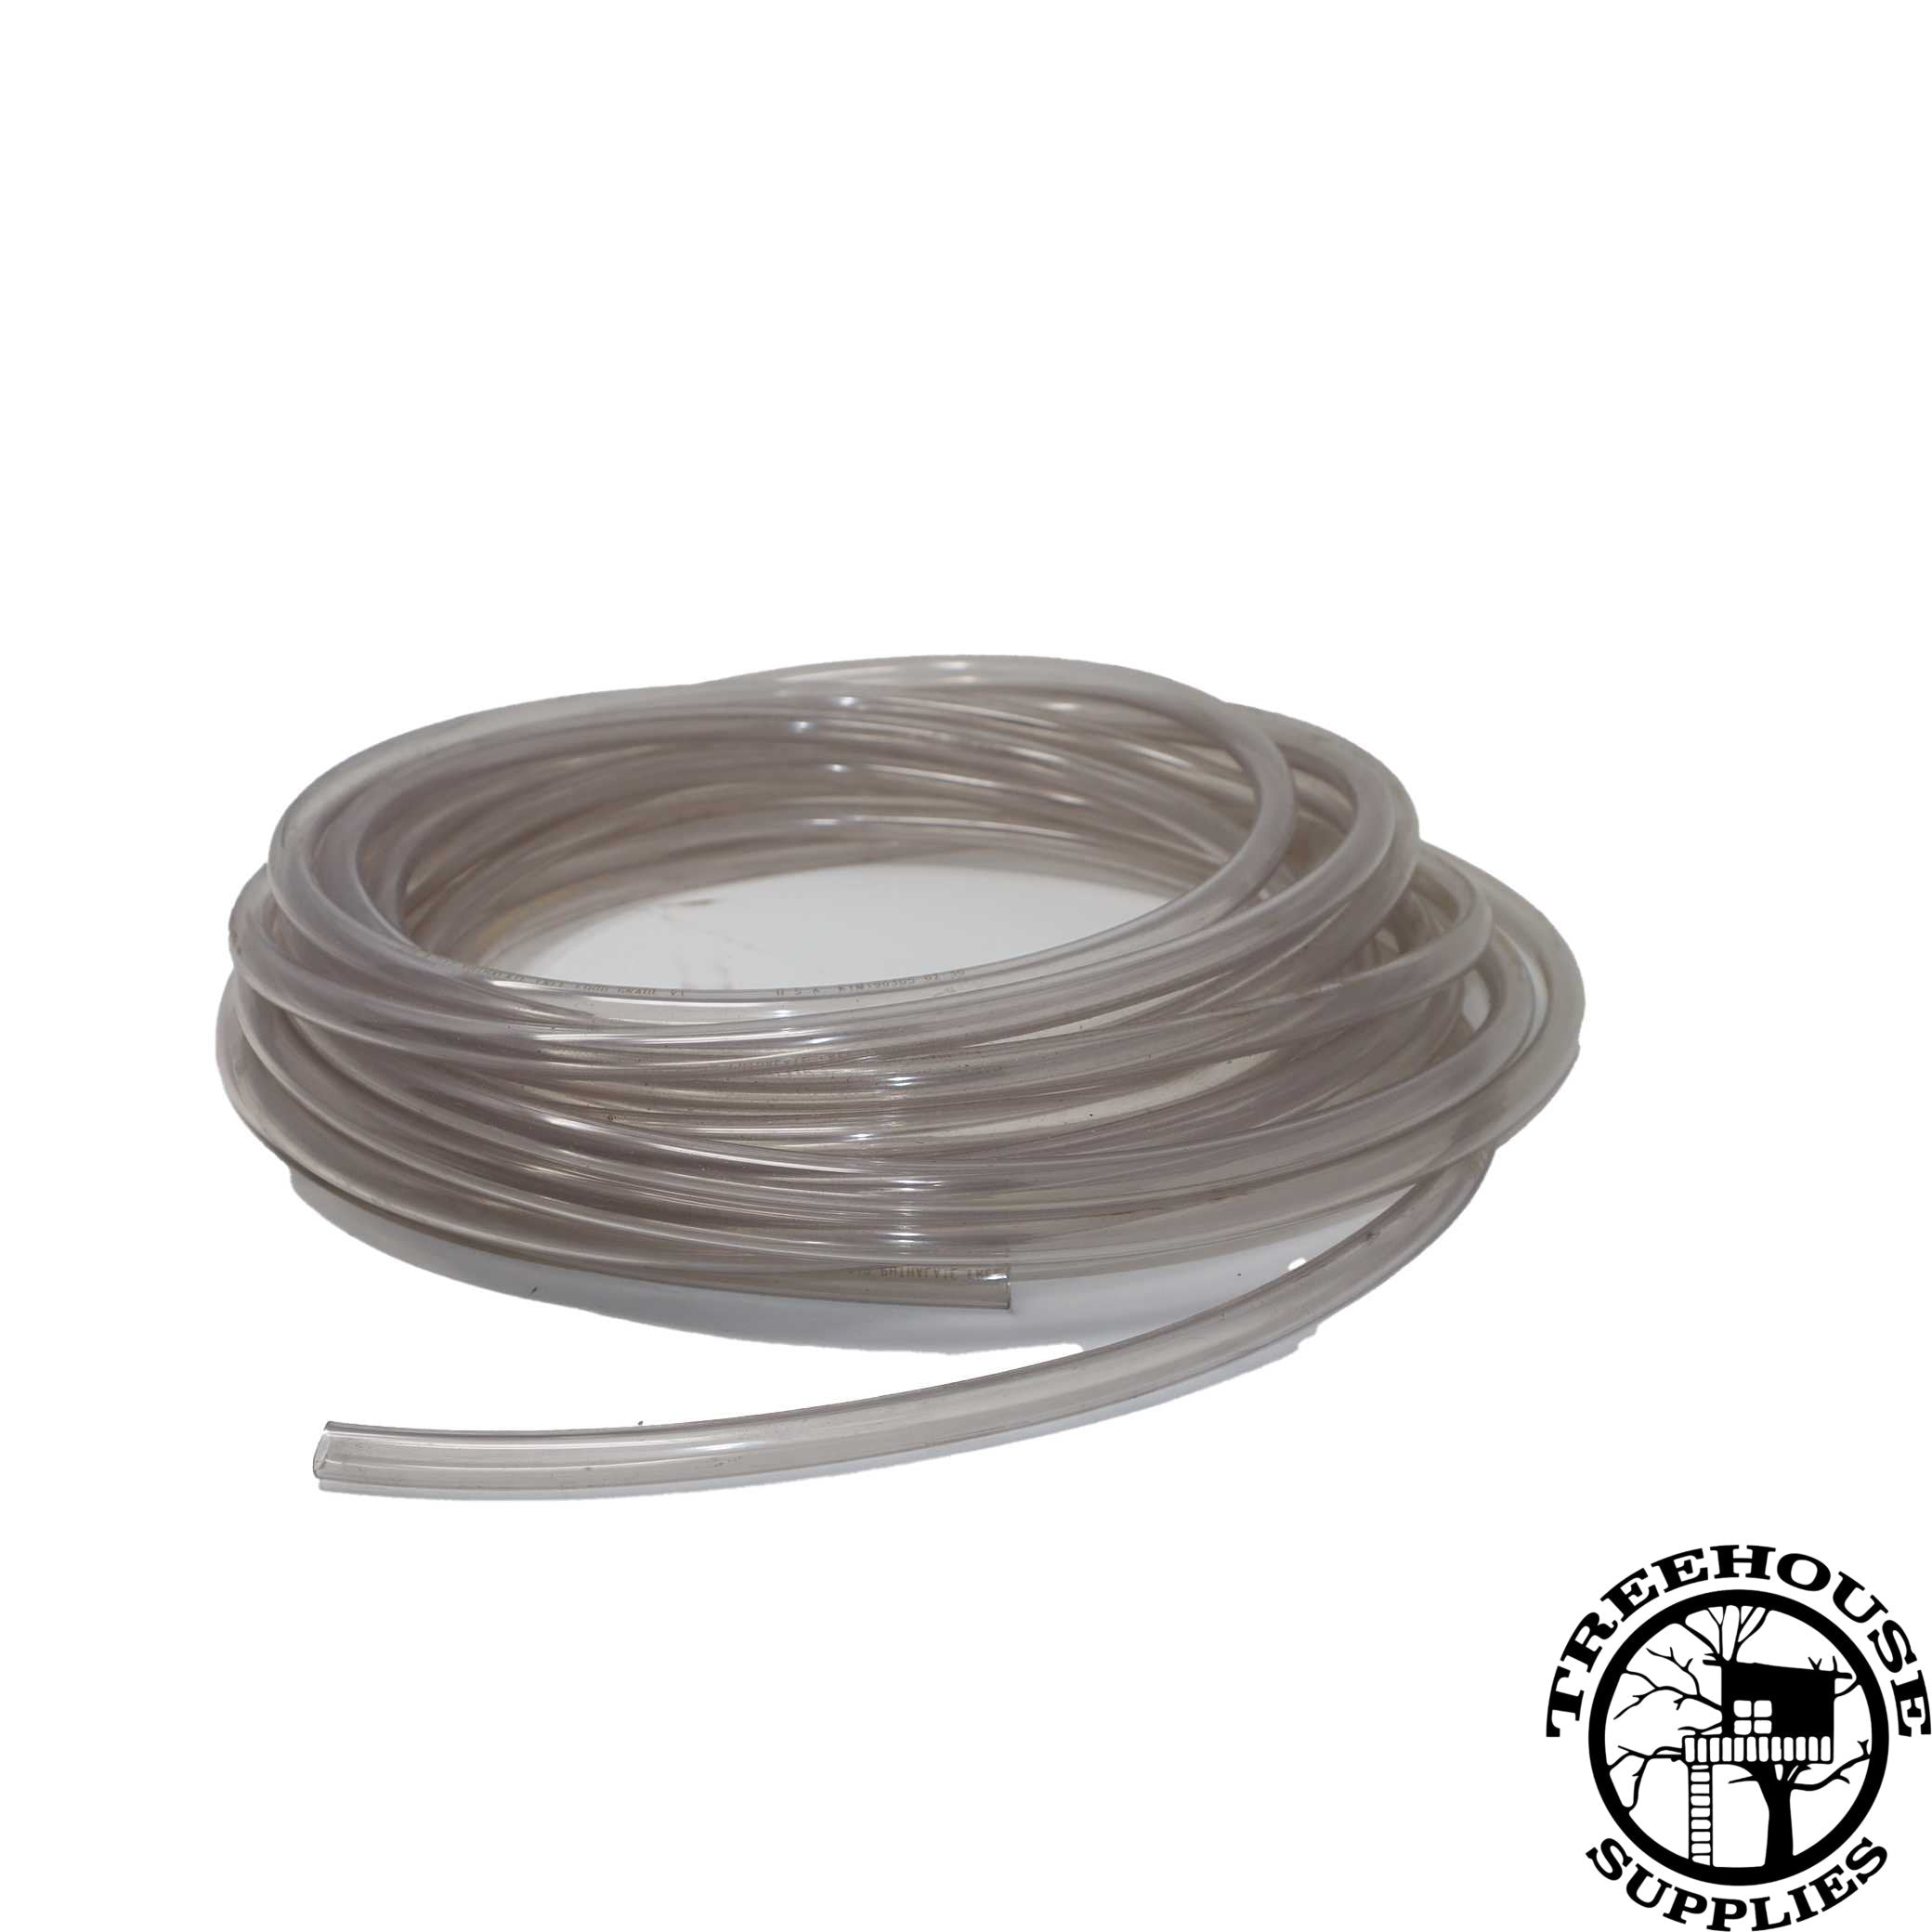 An image of a clear plastic tubing used for a water leveling. This tubing would be used to ensure that a treehouse platform is level by checking the water level in the tubing.